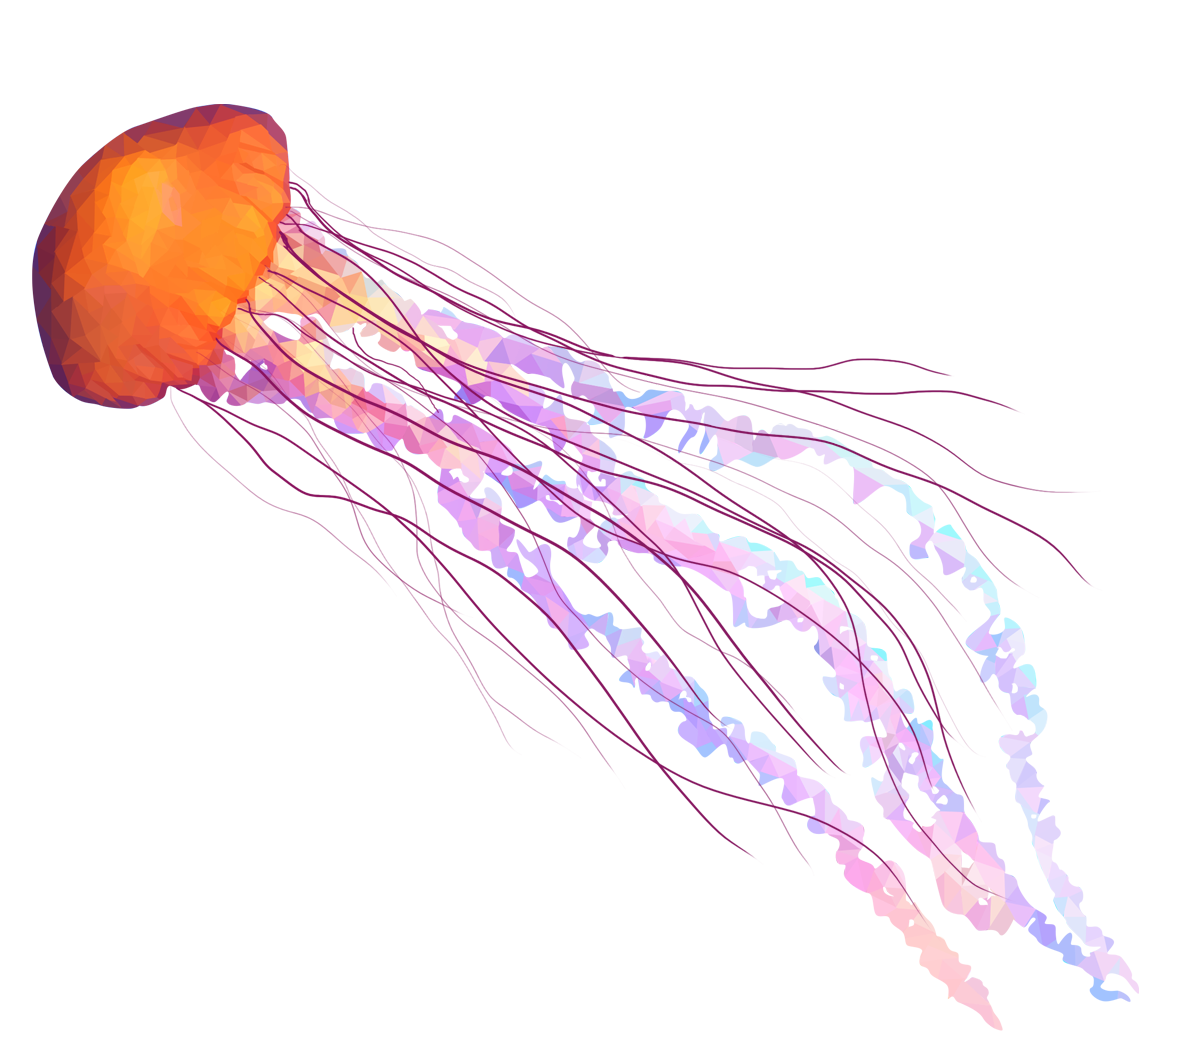 Jellyfish, Hand-painted Jelly